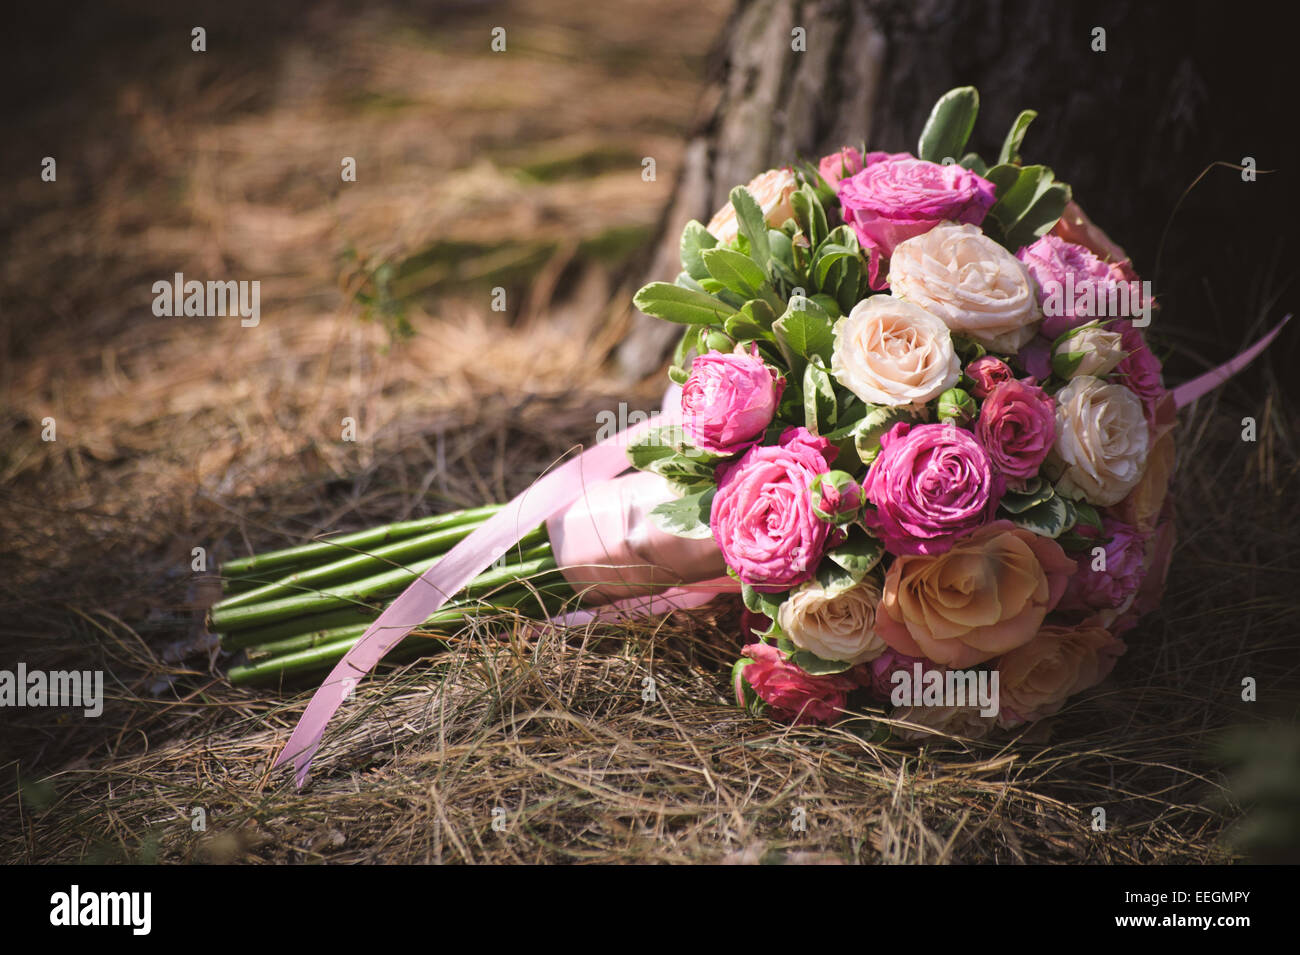 wedding bouquet from different rose color roses Stock Photo